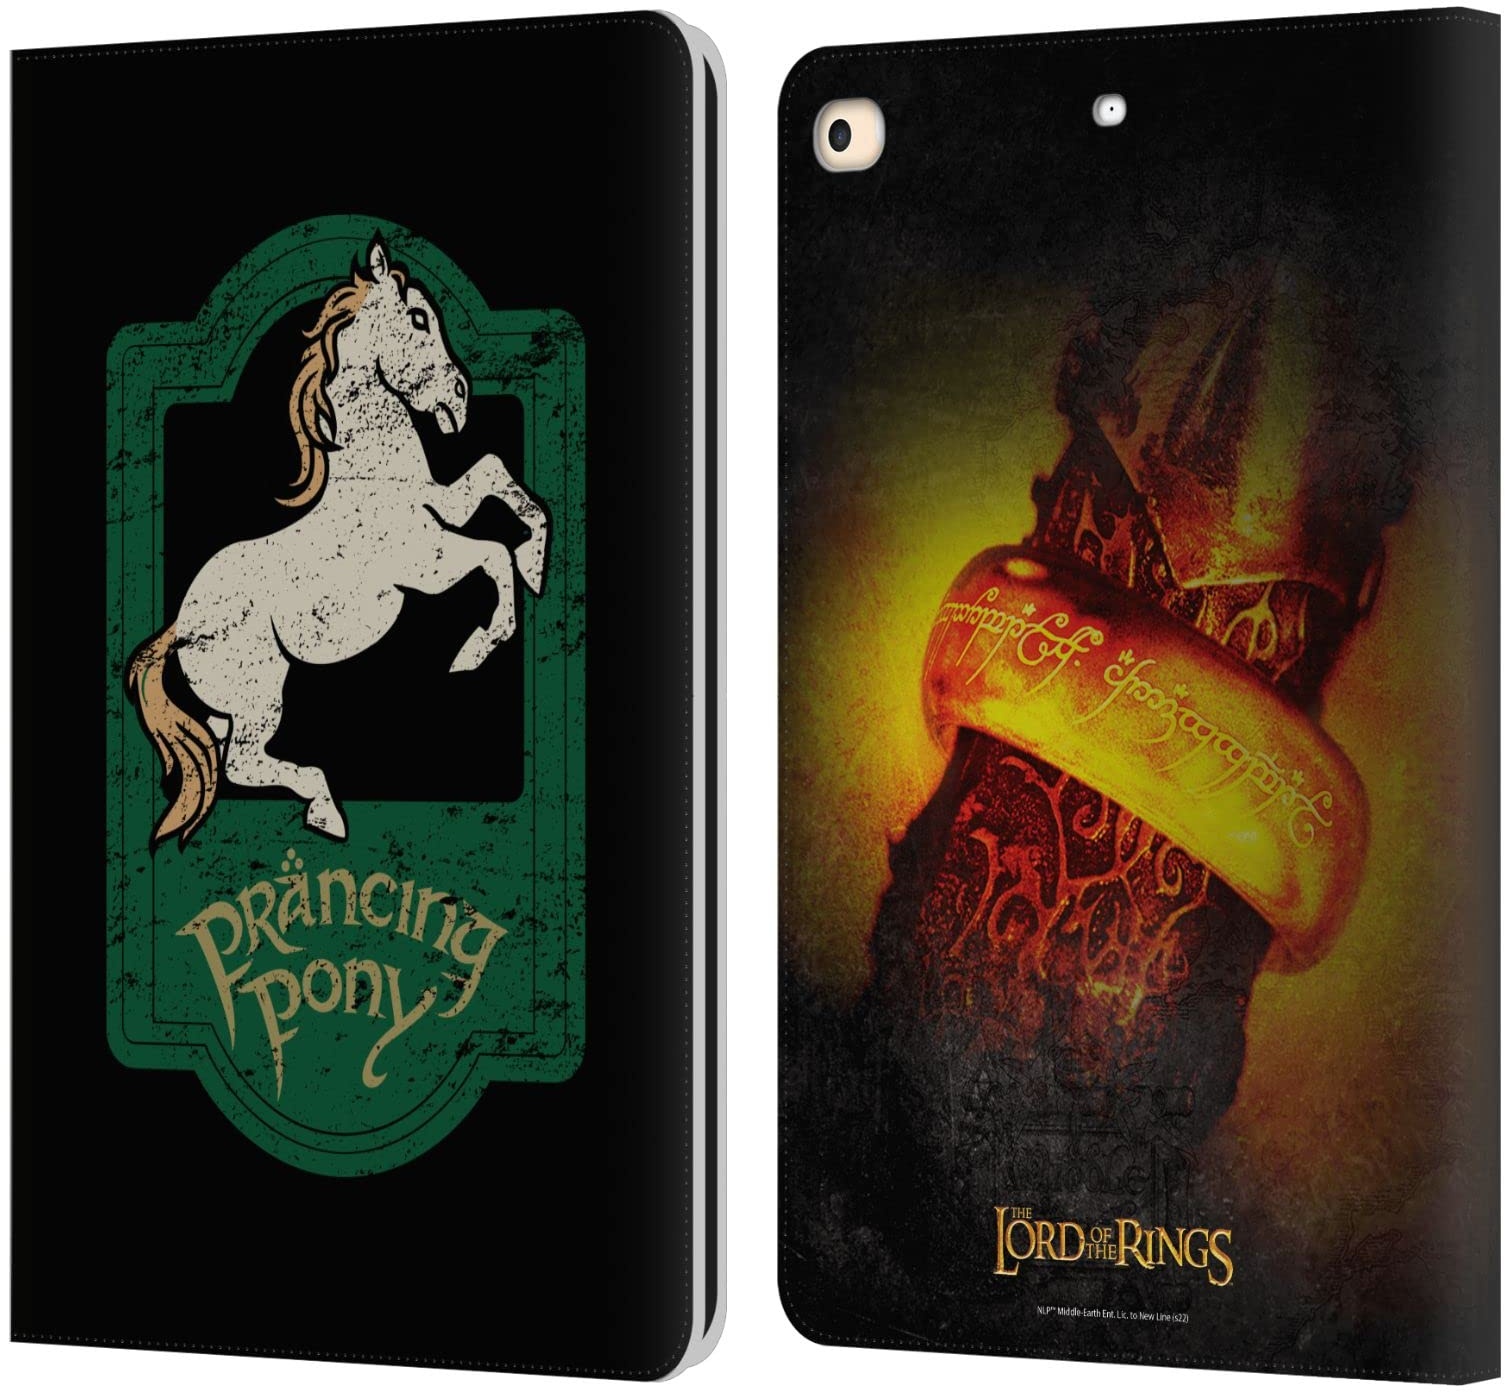 Head Case Designs Offizielle The Lord of The Rings The Fellowship of The Ring Prancing Pony Grafiken Leder Brieftaschen Handyhülle Hülle Huelle kompatibel mit Apple iPad 9.7 2017 / iPad 9.7 2018